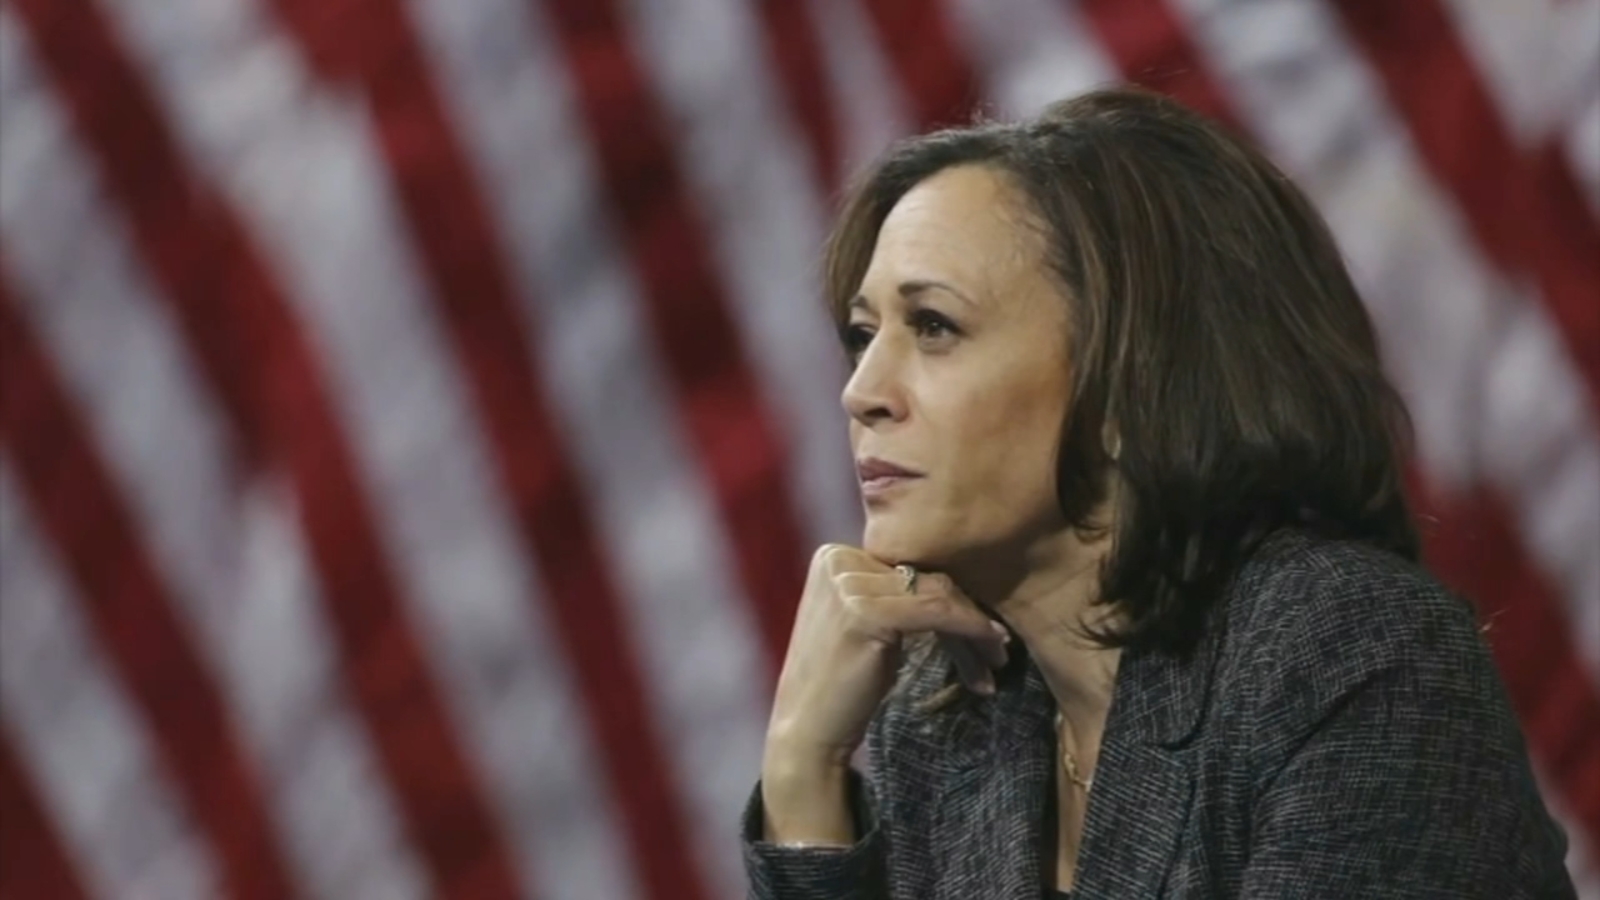 SF Democratic leaders hold rally in support of VP Kamala Harris for presidential nomination